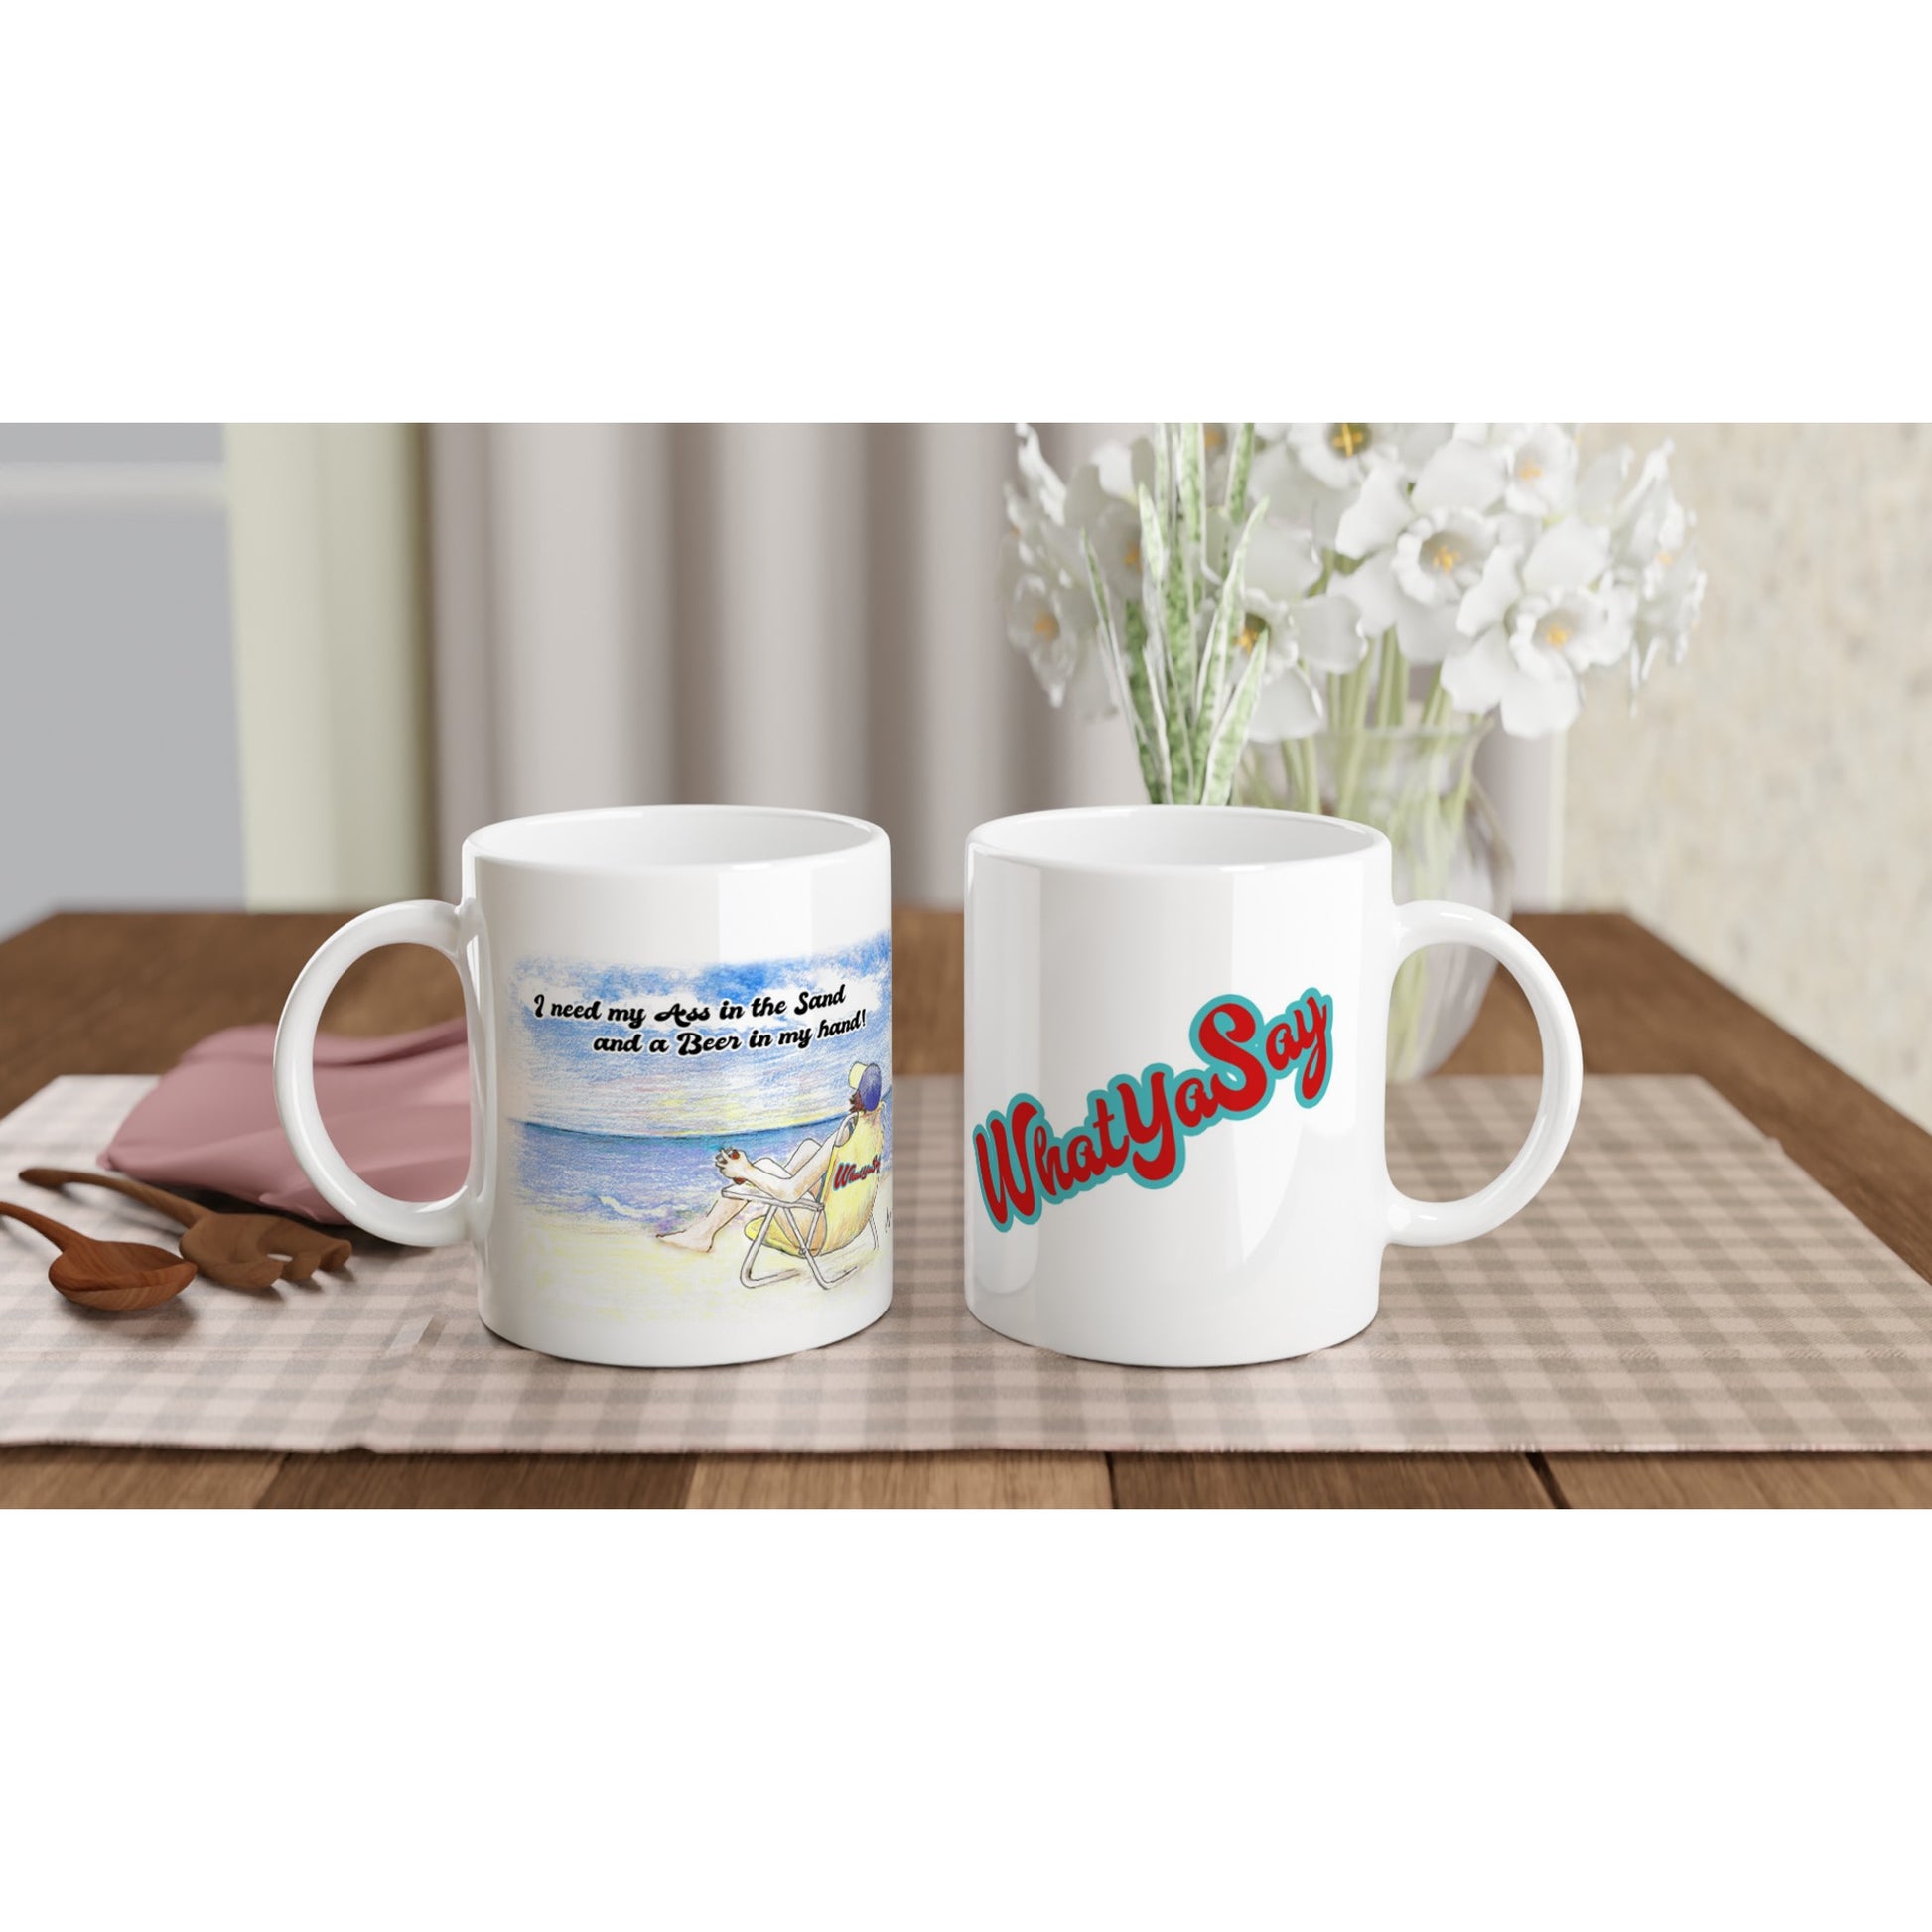 Two White ceramic 11oz mugs with motto I need my Ass in the Sand and a Beer in my hand on front and WhatYa Say logo on back coffee mugs are dishwasher and microwave safe from WhatYa Say Apparel sitting on coffee table with green and white placemat.